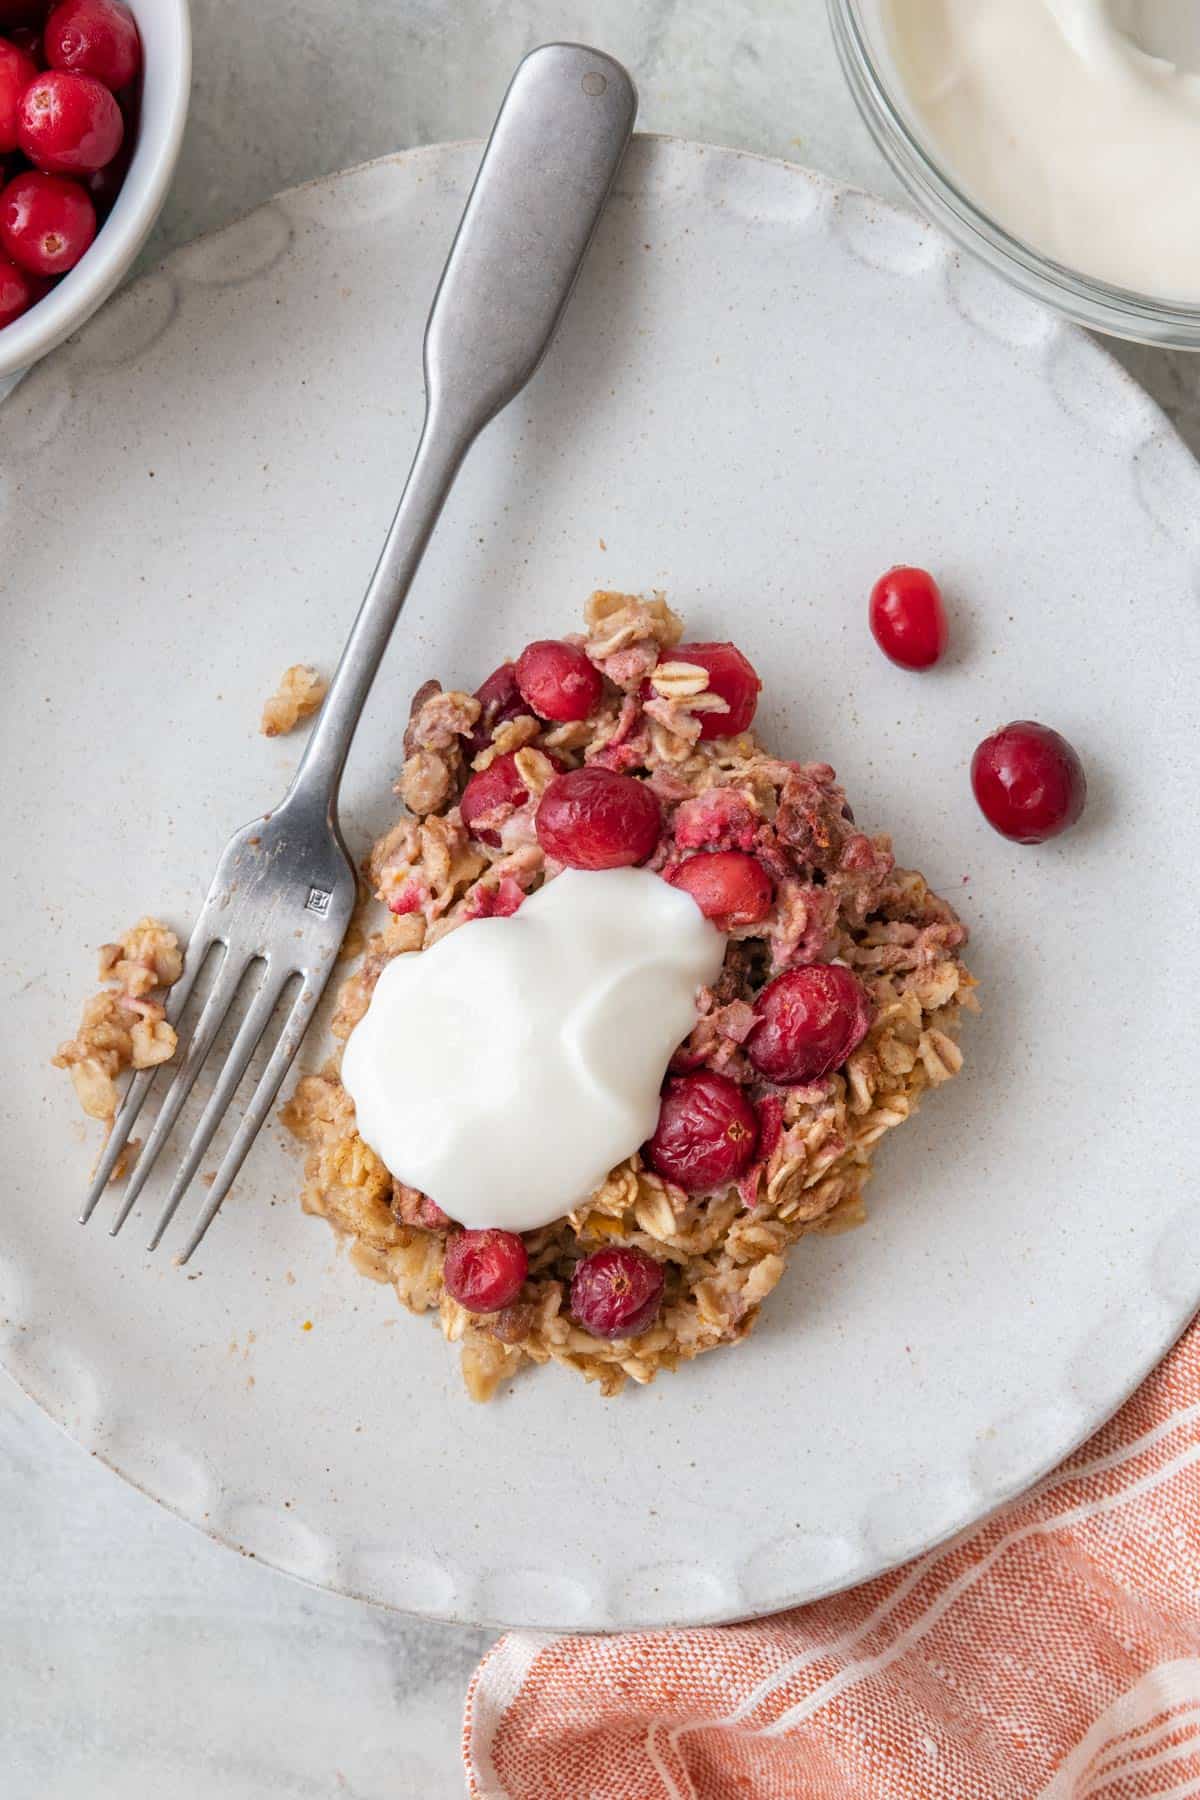 Cranberry pecan baked oatmeal served on a small round plate with a fork and fresh cranberries and yogurt on top and nearby.